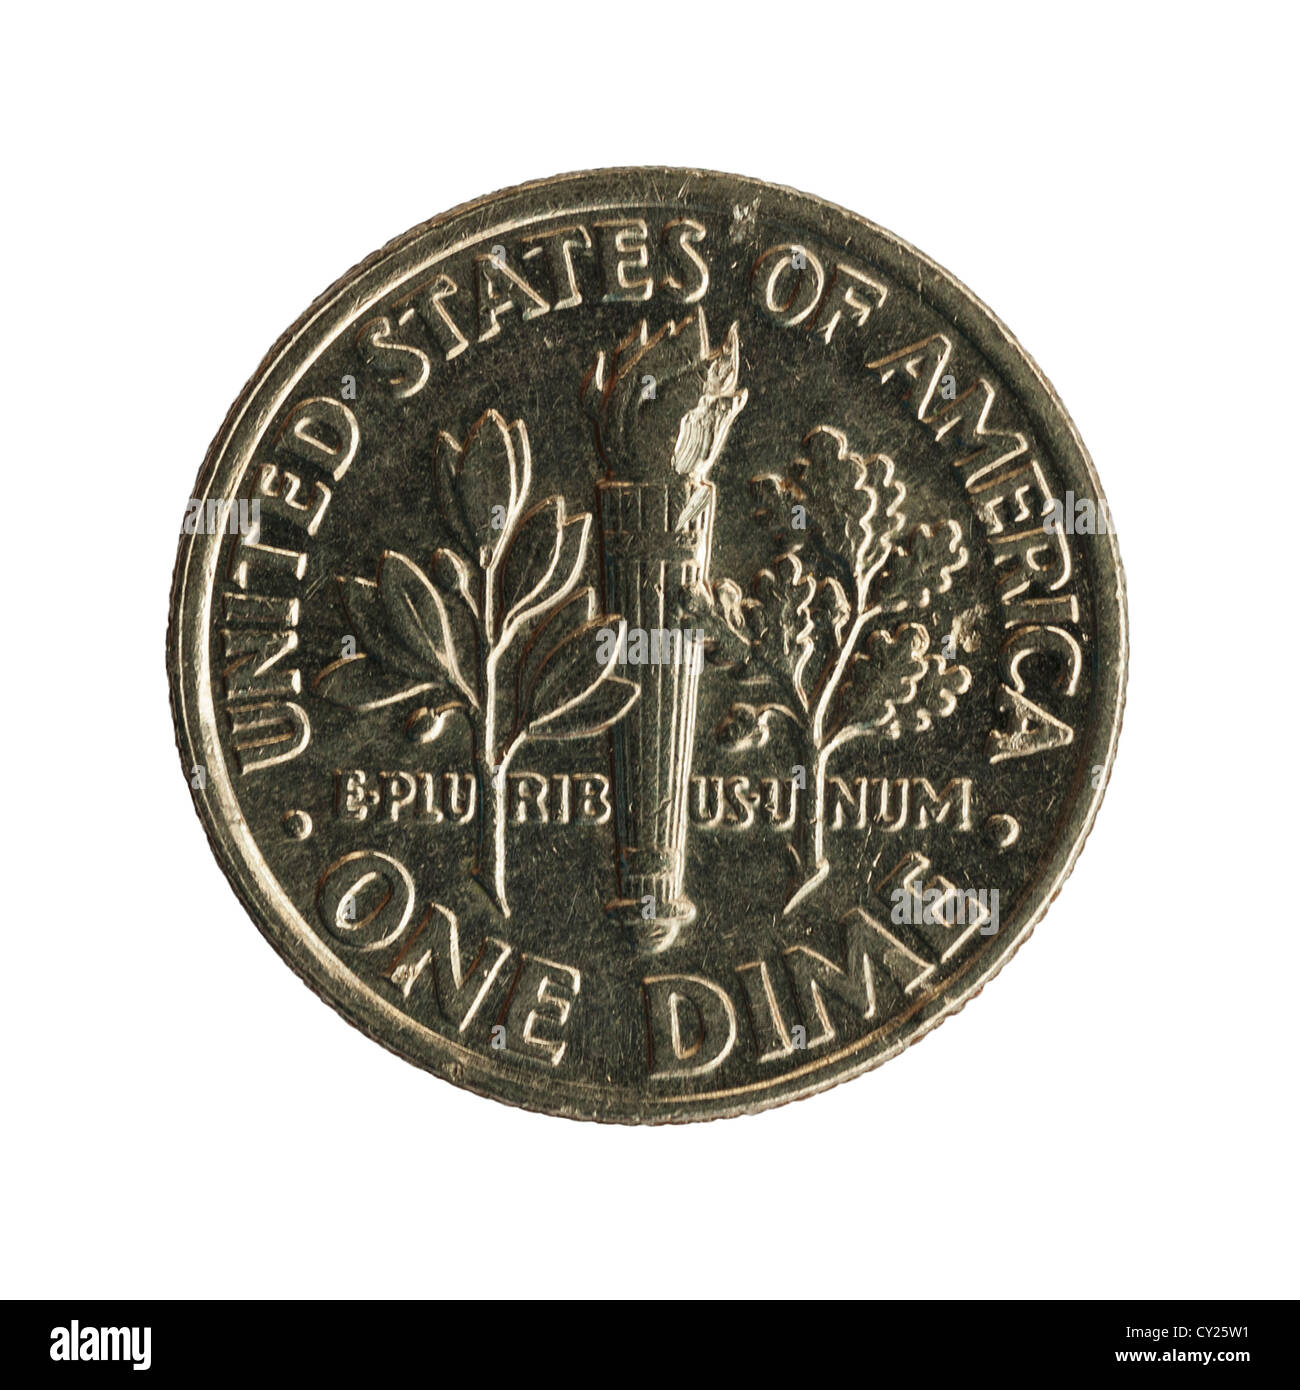 A one dime coin ( american currency ) on a white background Stock Photo